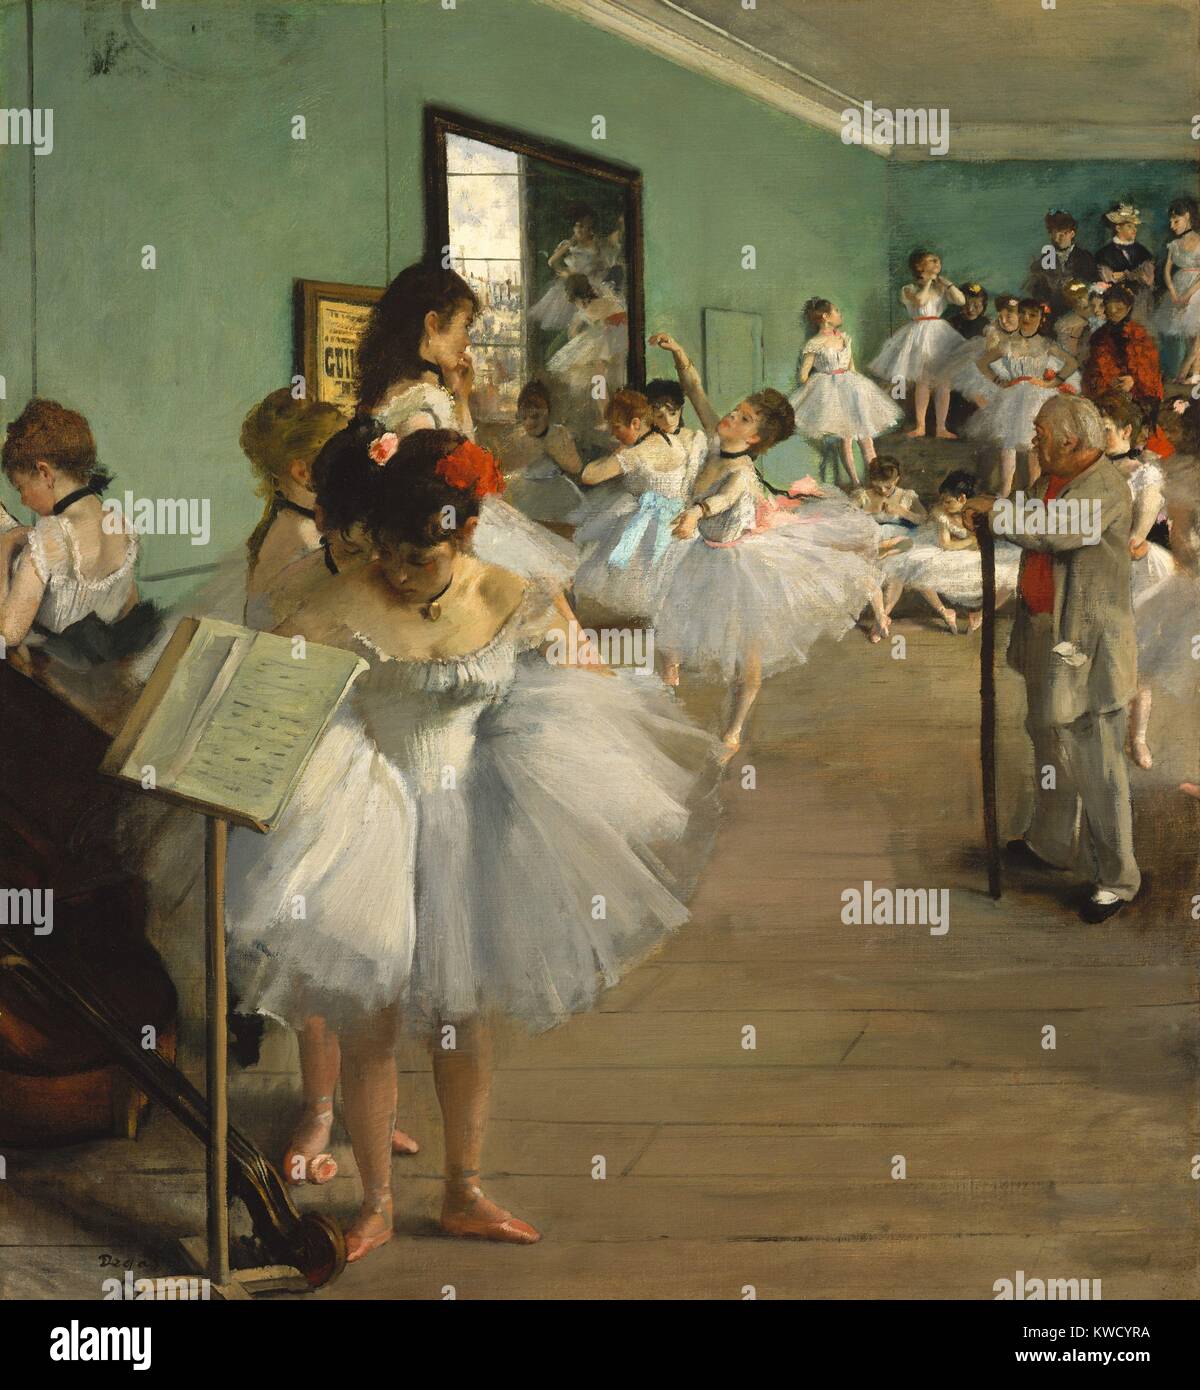 The Dance Class, by Edgar Degas, 1873, French impressionist painting, oil on canvas. Over twenty women, ballerinas and their mothers, wait while a dancer executes her examination. Jules Perrot, a famous ballet master, conducts the class (BSLOC 2017 3 105) Stock Photo